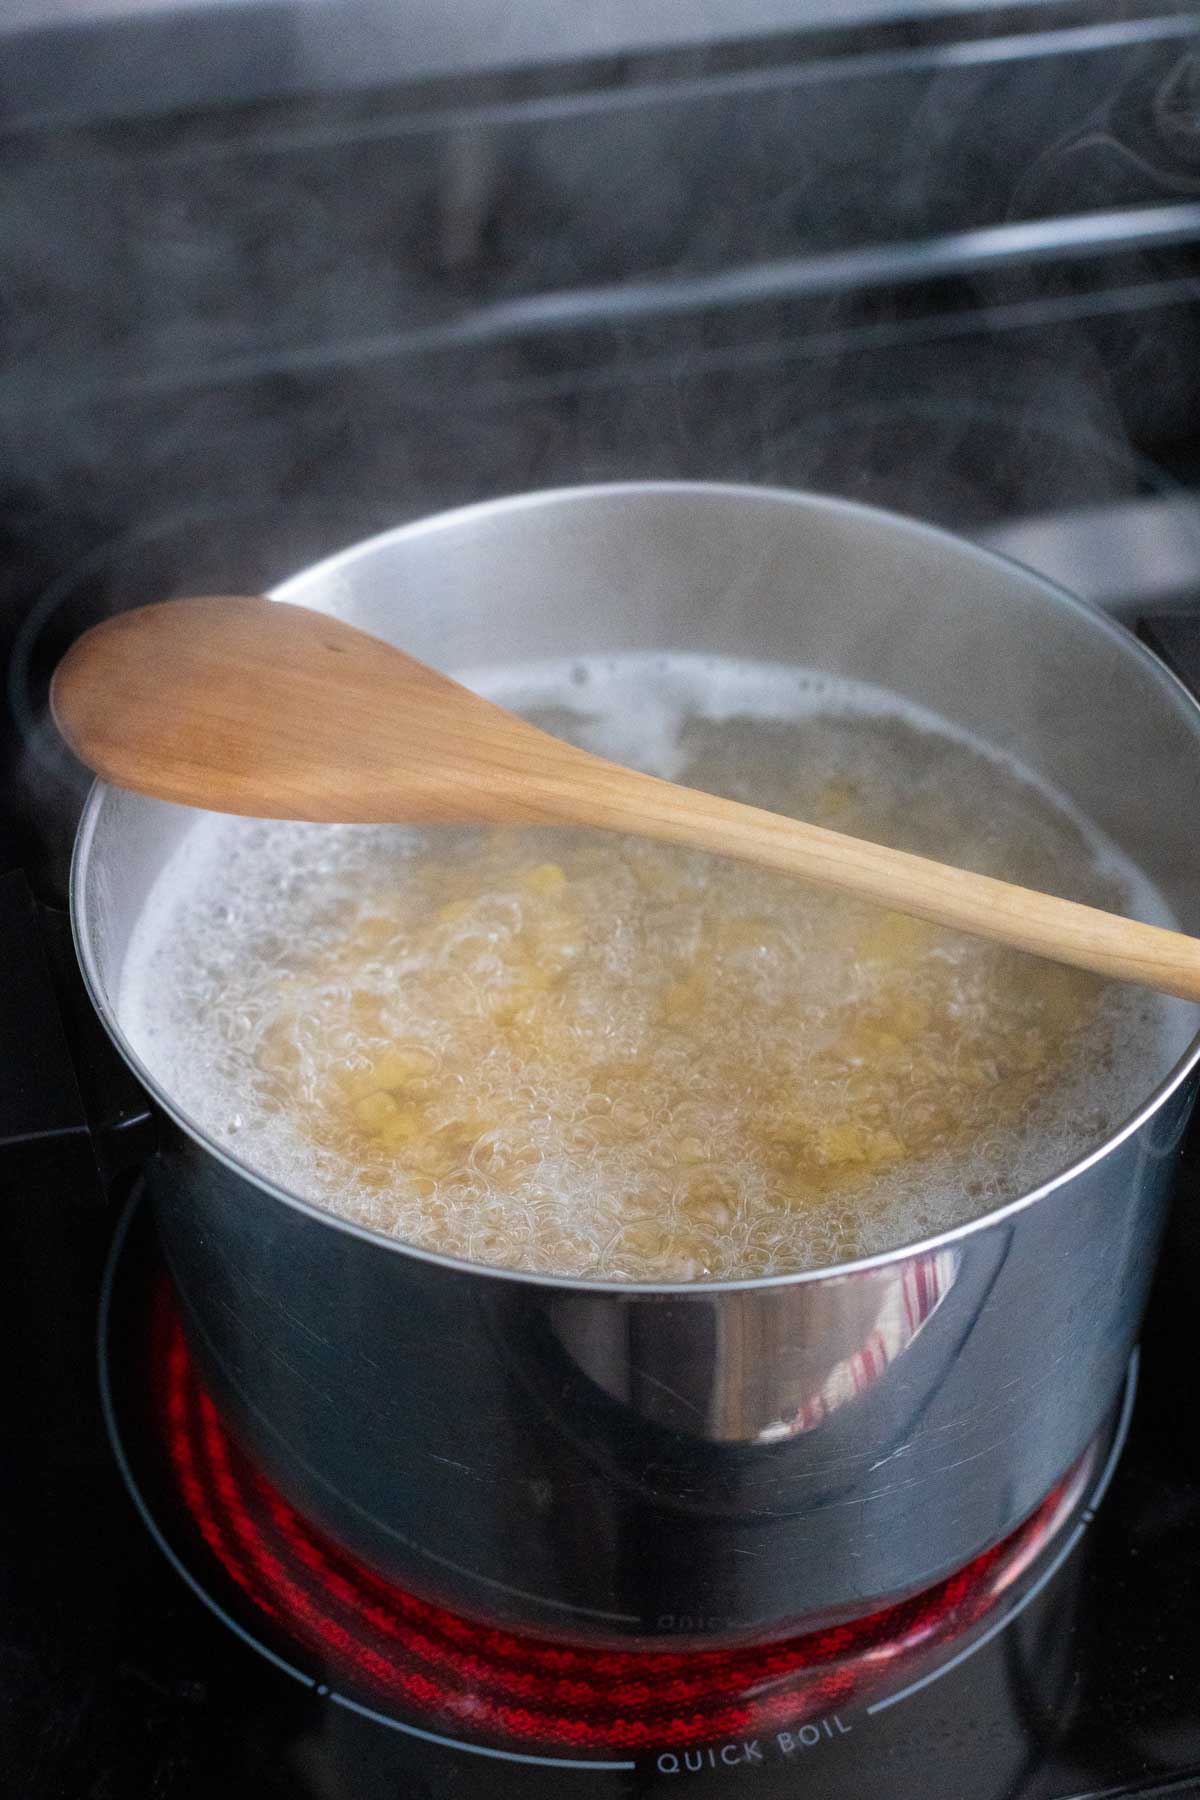 The pasta pot has a wooden spoon over the boiling water to prevent it from boiling over.